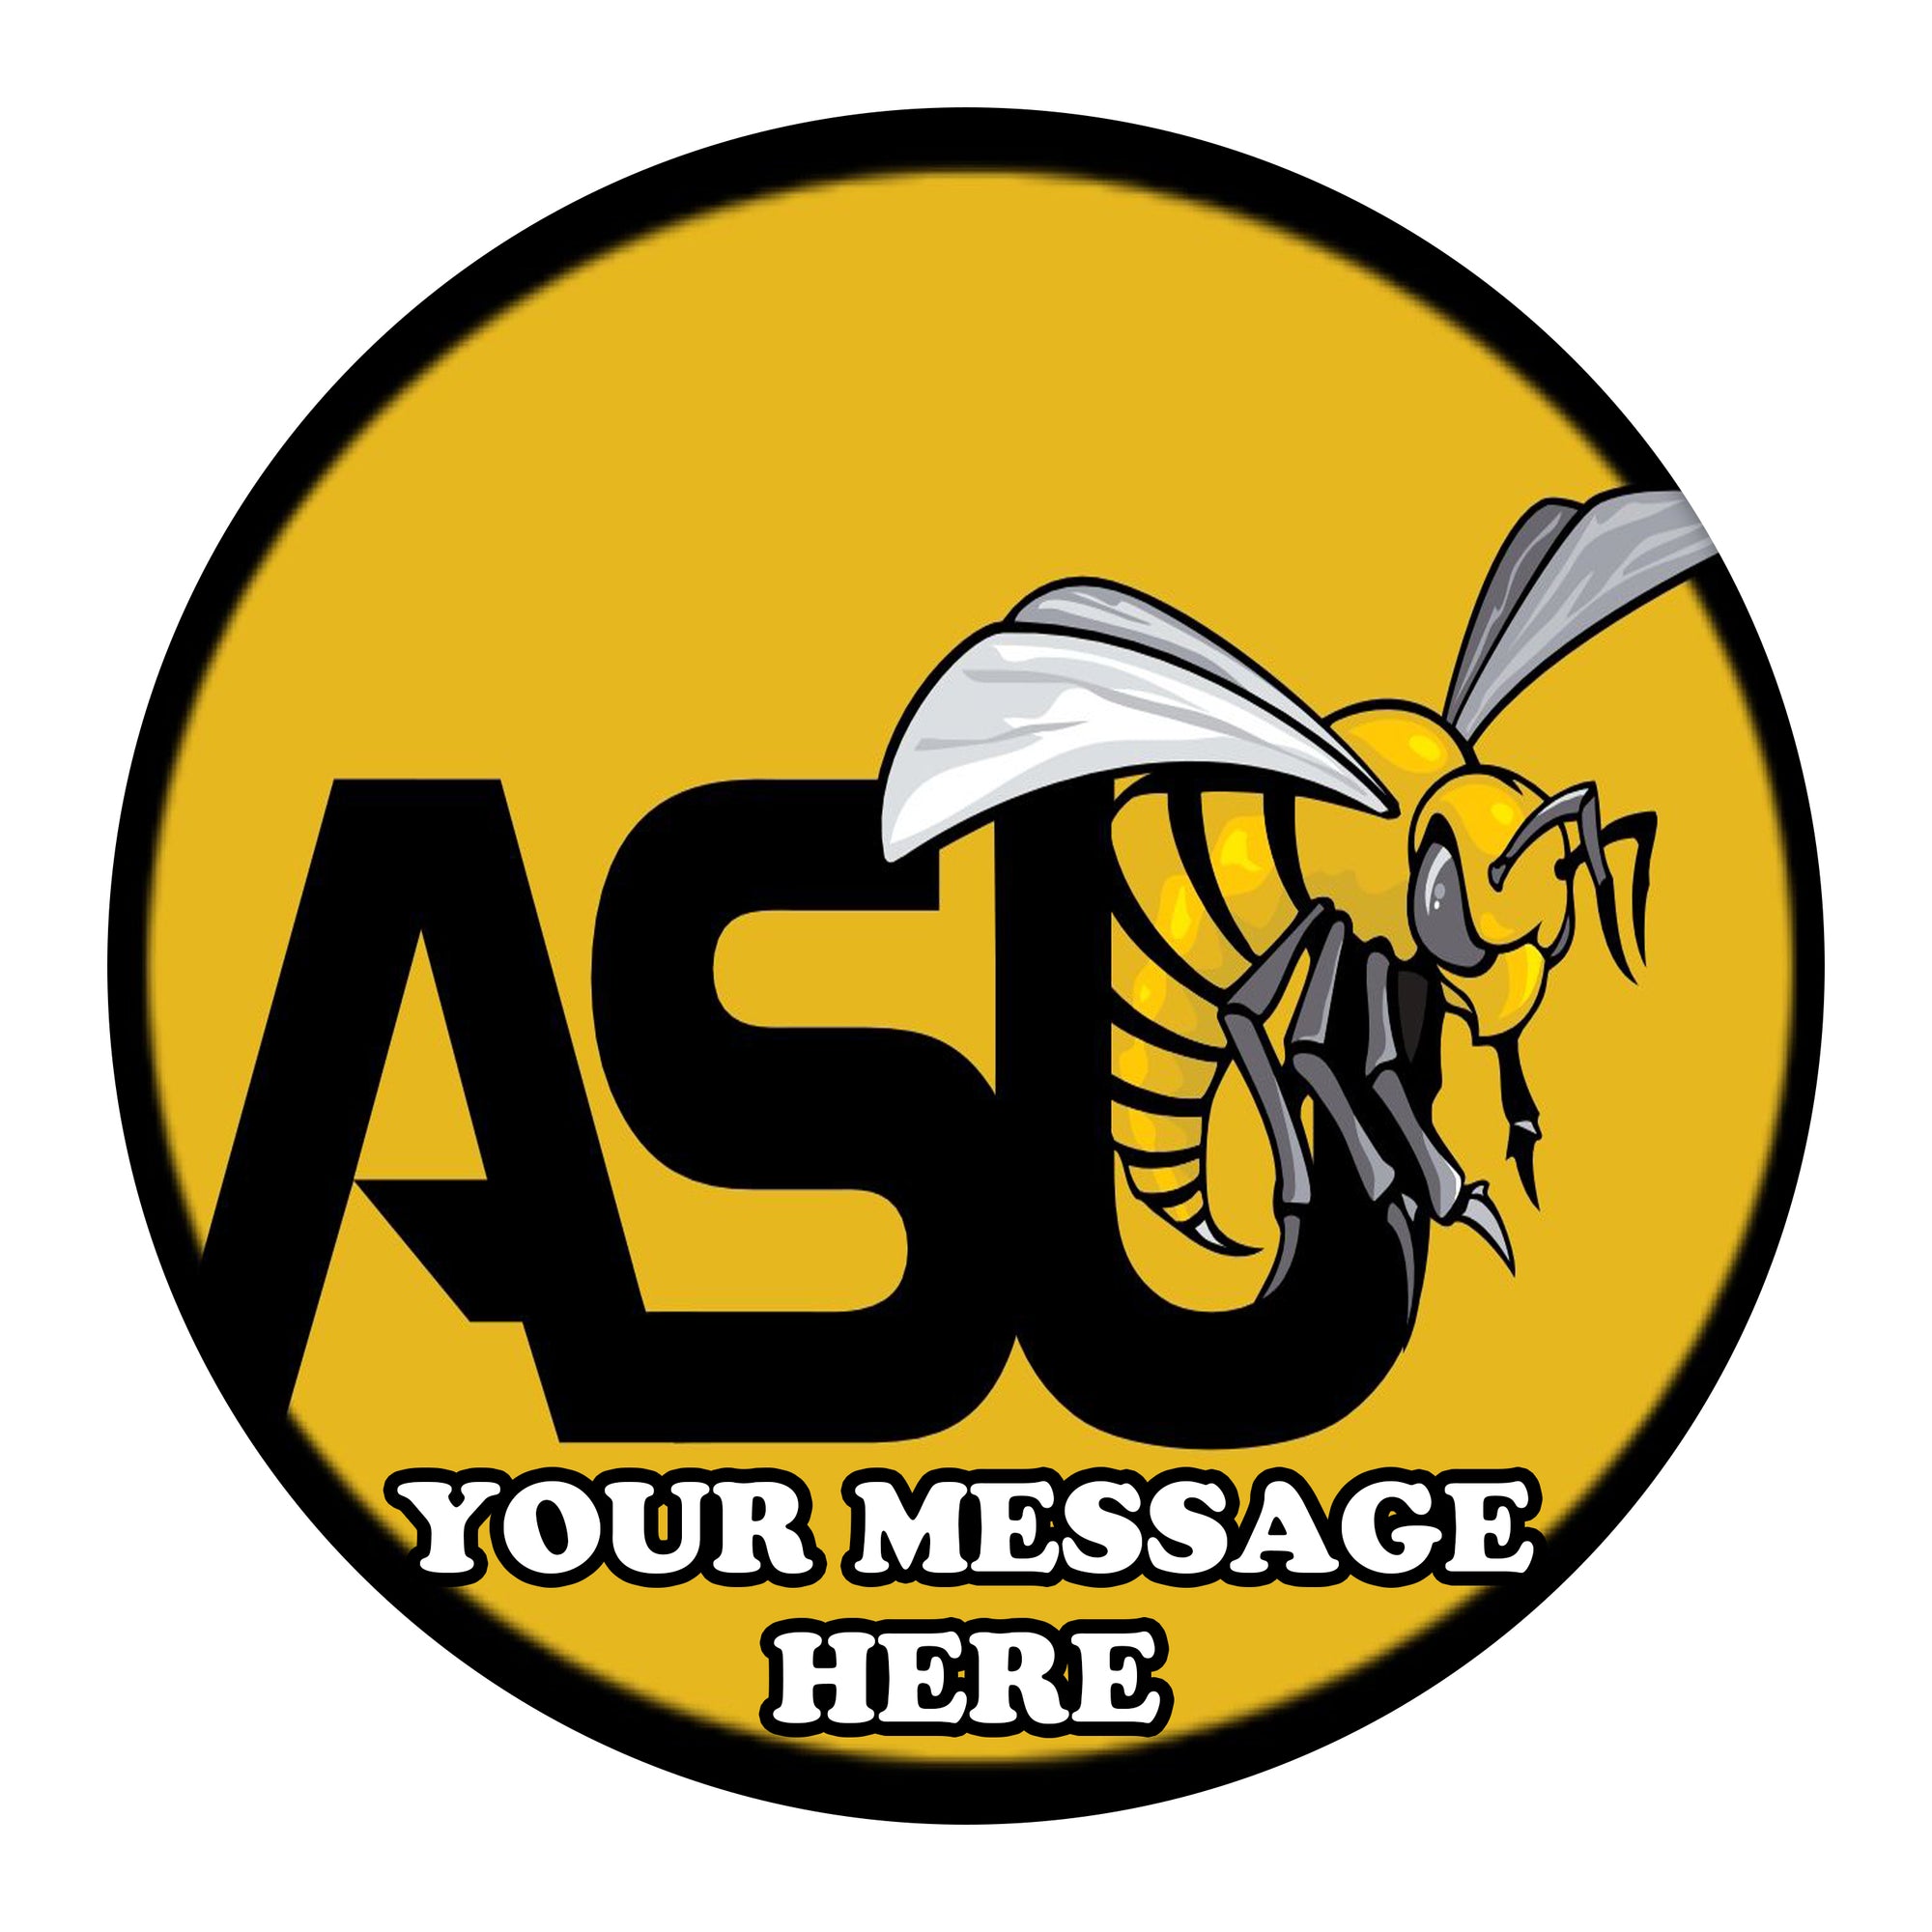 Alabama State University Hornets Team Logo Edible Cake Topper Image AB – A  Birthday Place